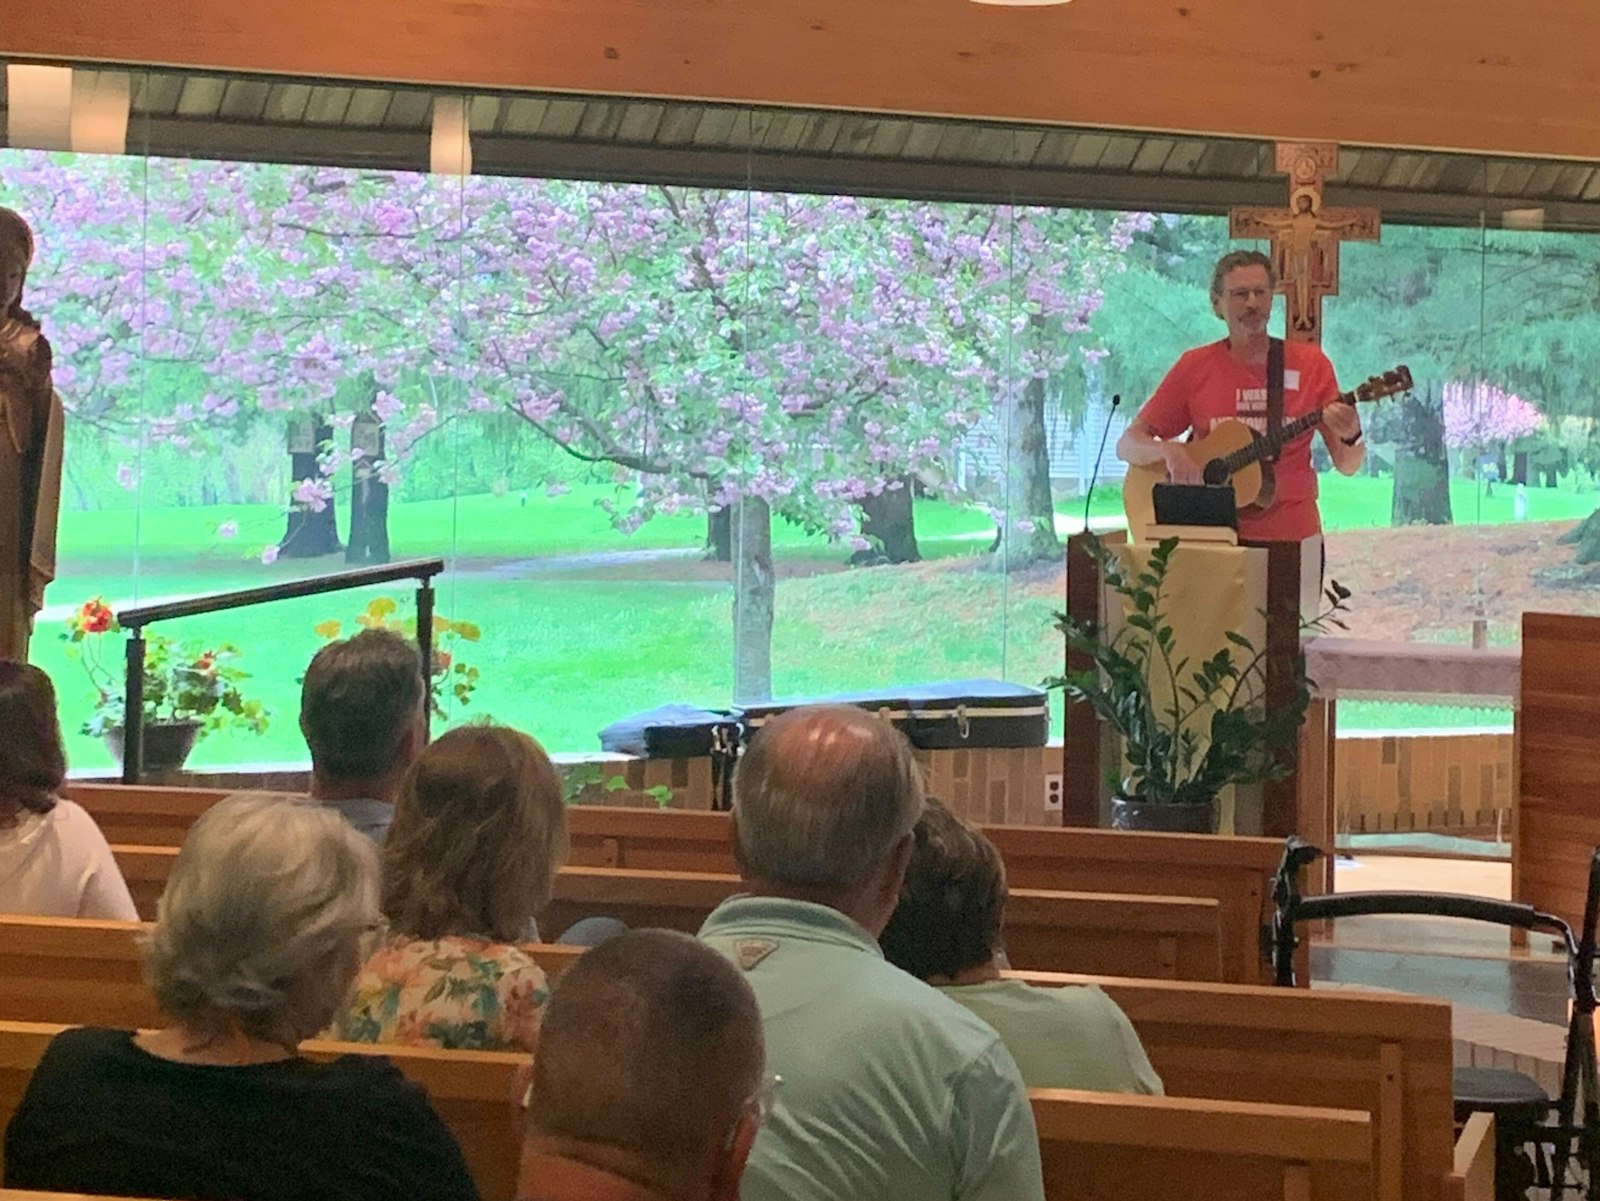 Mike Carter leads praise and worship during a Cursillo weekend retreat at the Maryville Retreat Center in Holly. (Courtesy of Ann Sliney)